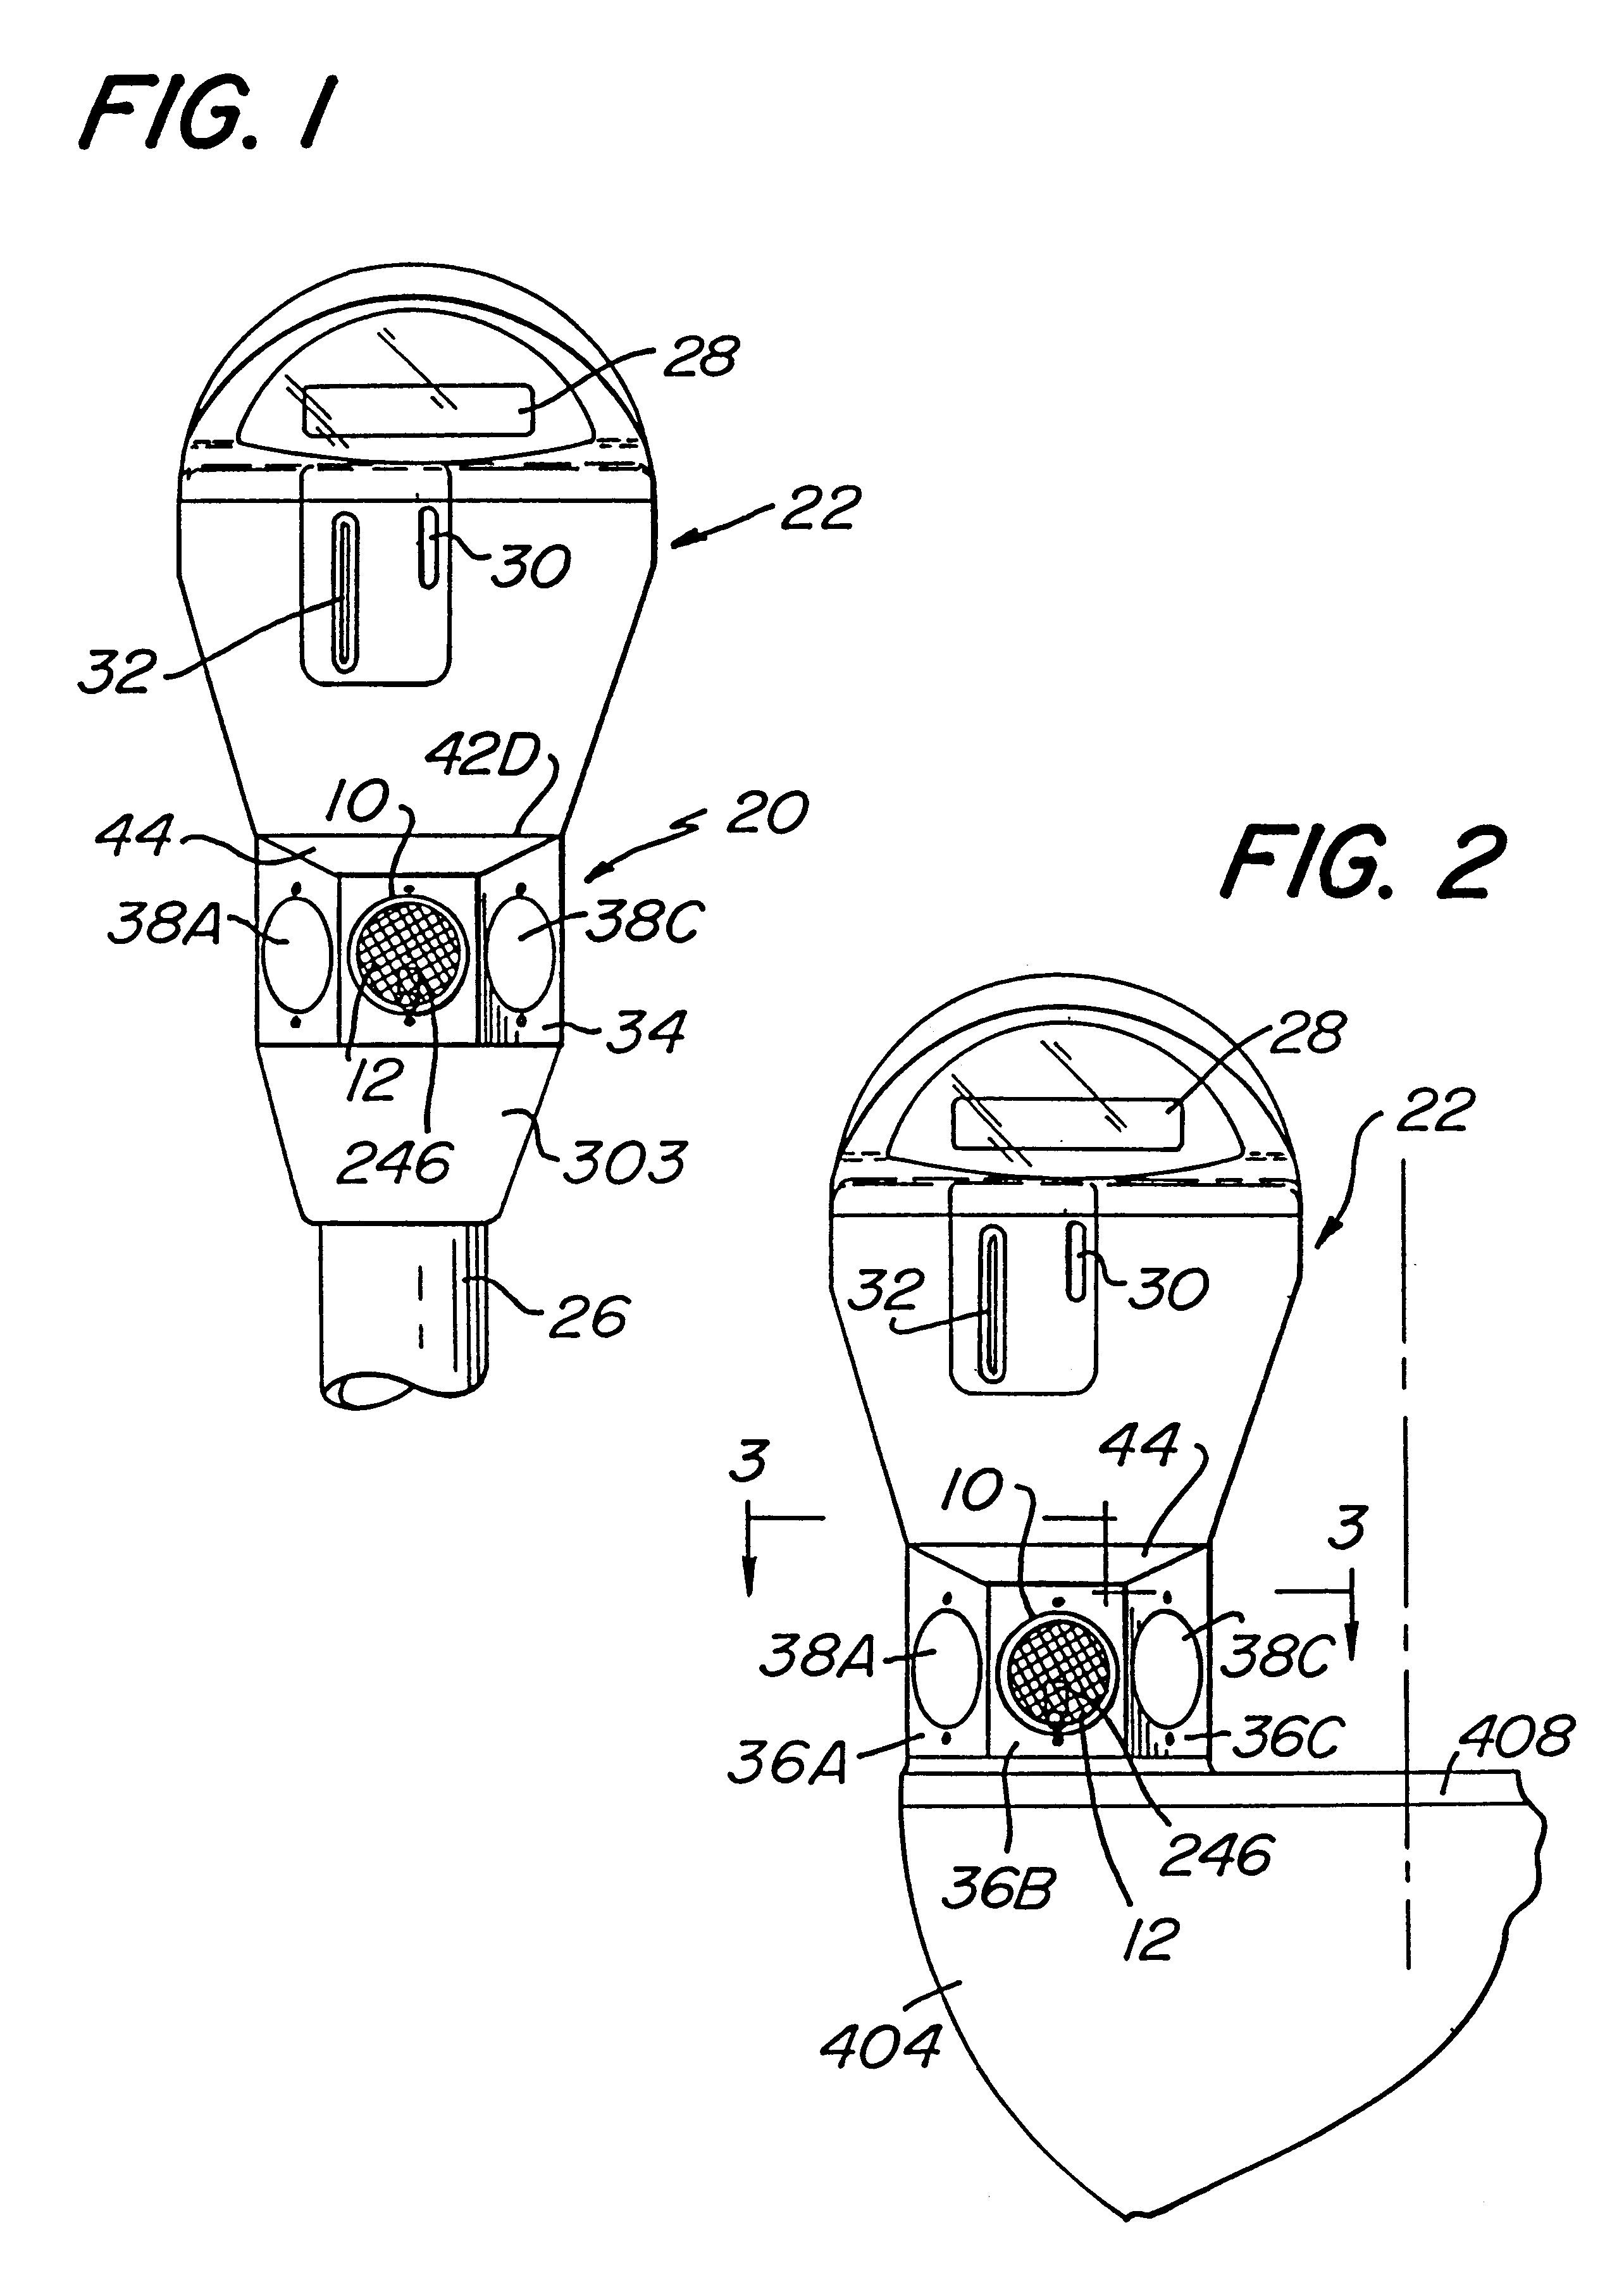 Universal adaptor for electronic parking meters